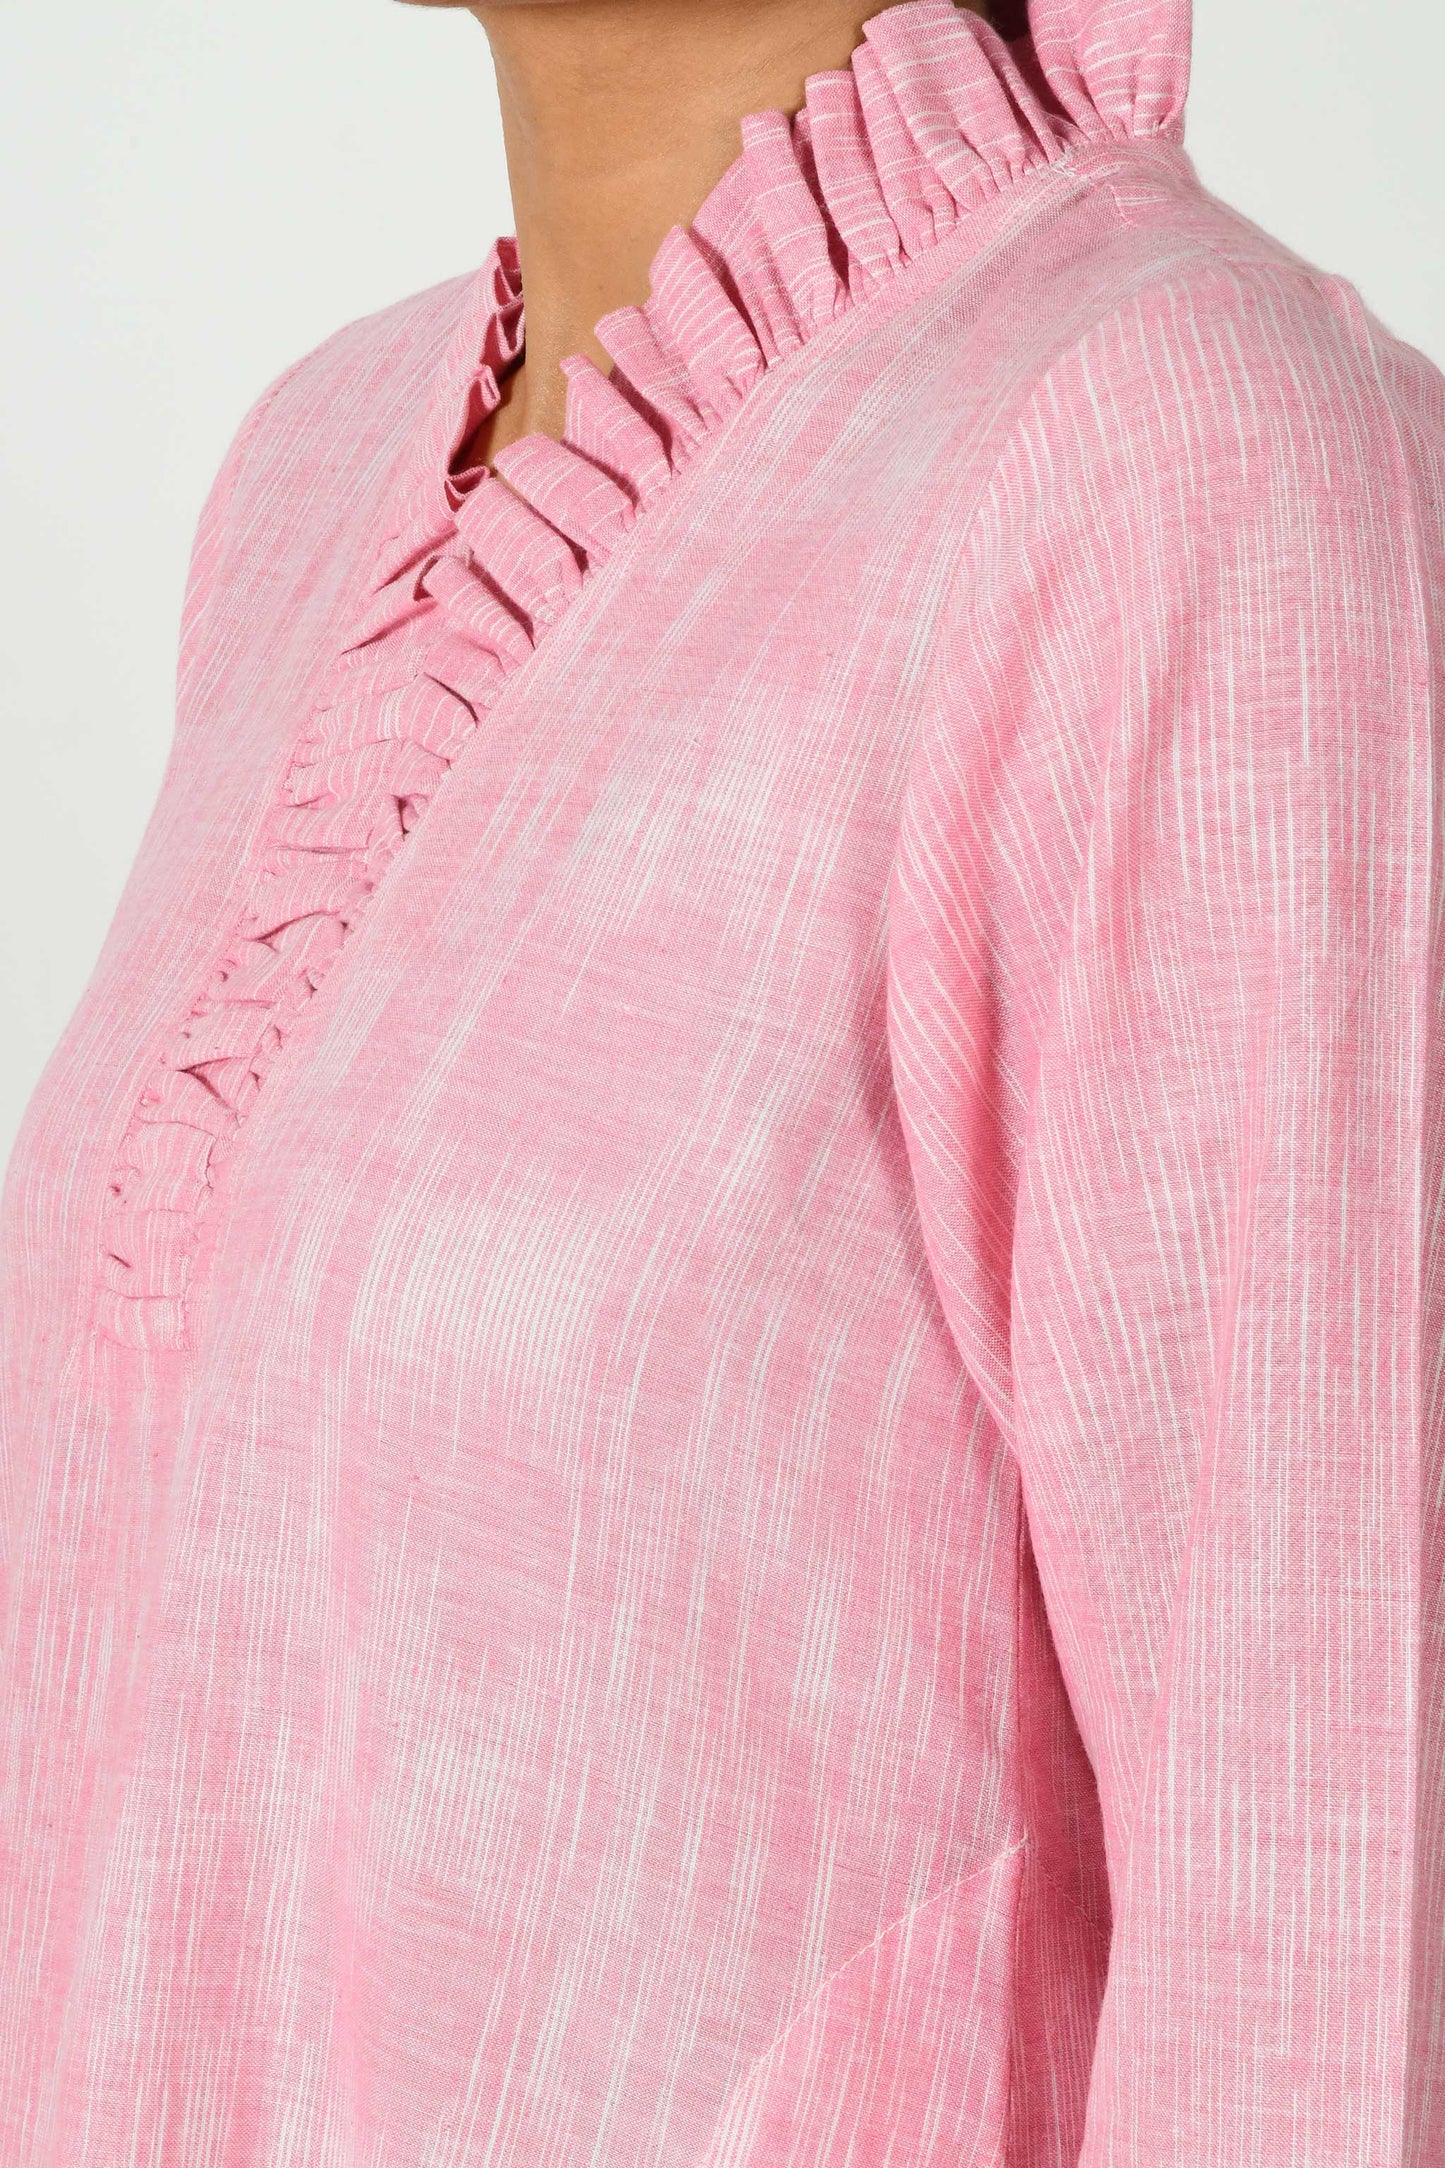 close of the pink flared neck of the textured cotton dress kurta.